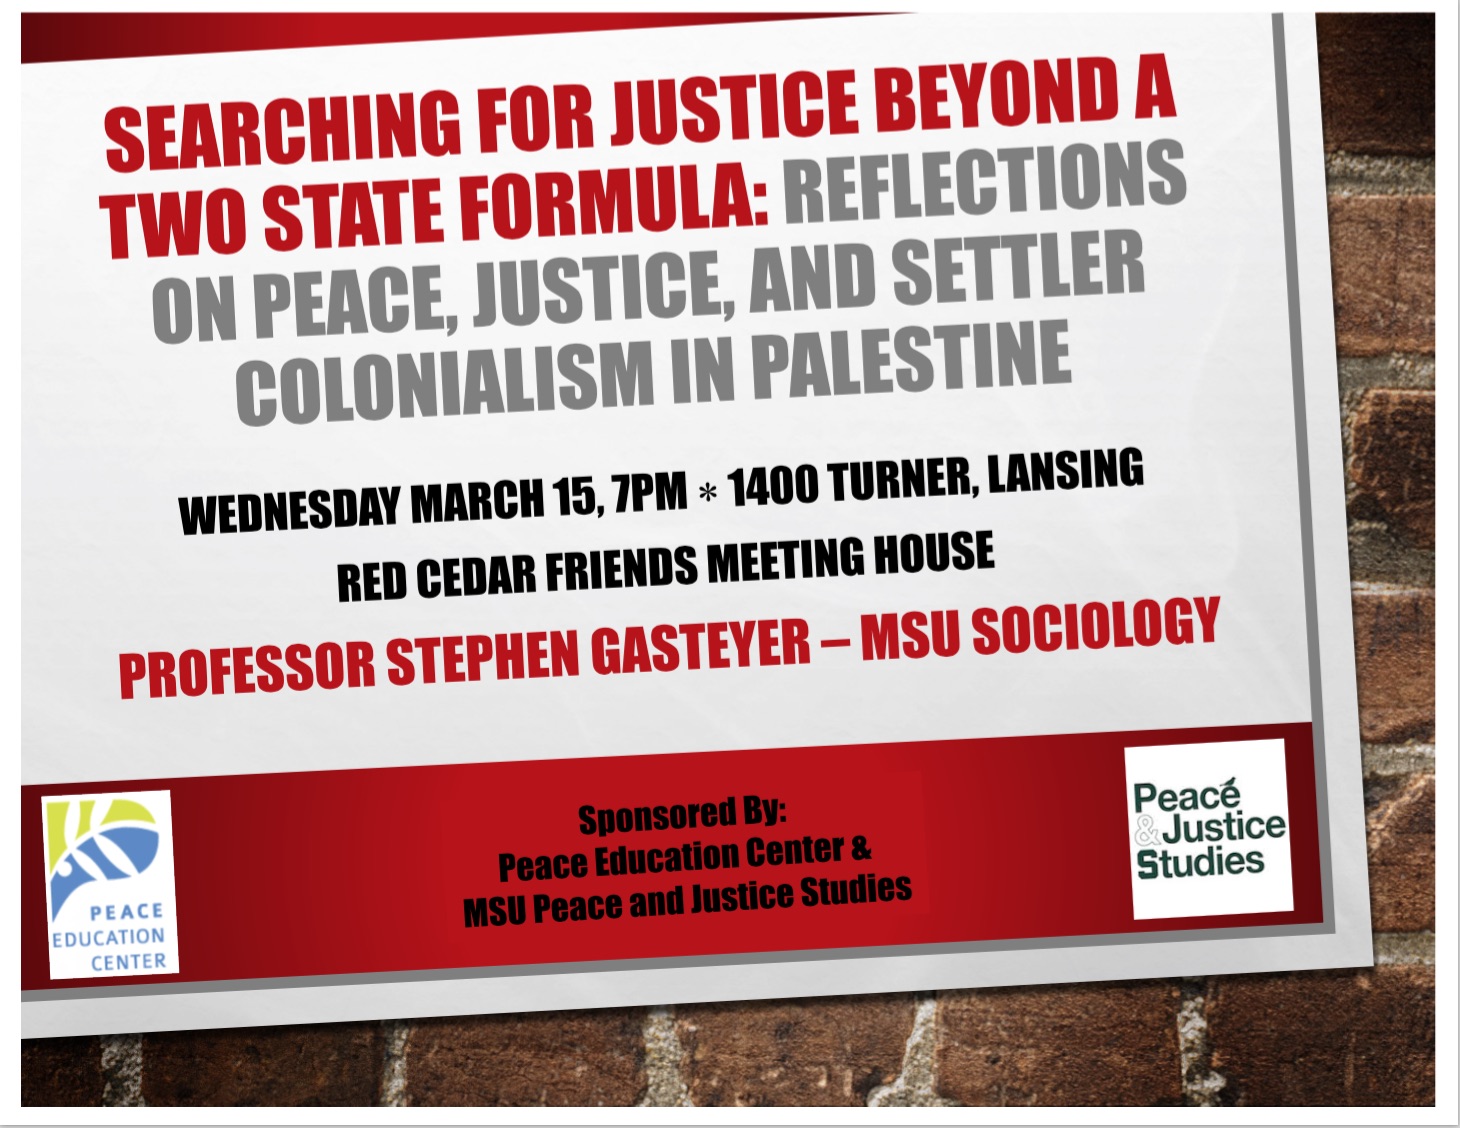 Reflections on Peace, Justice and Settler Colonialism in Palestine